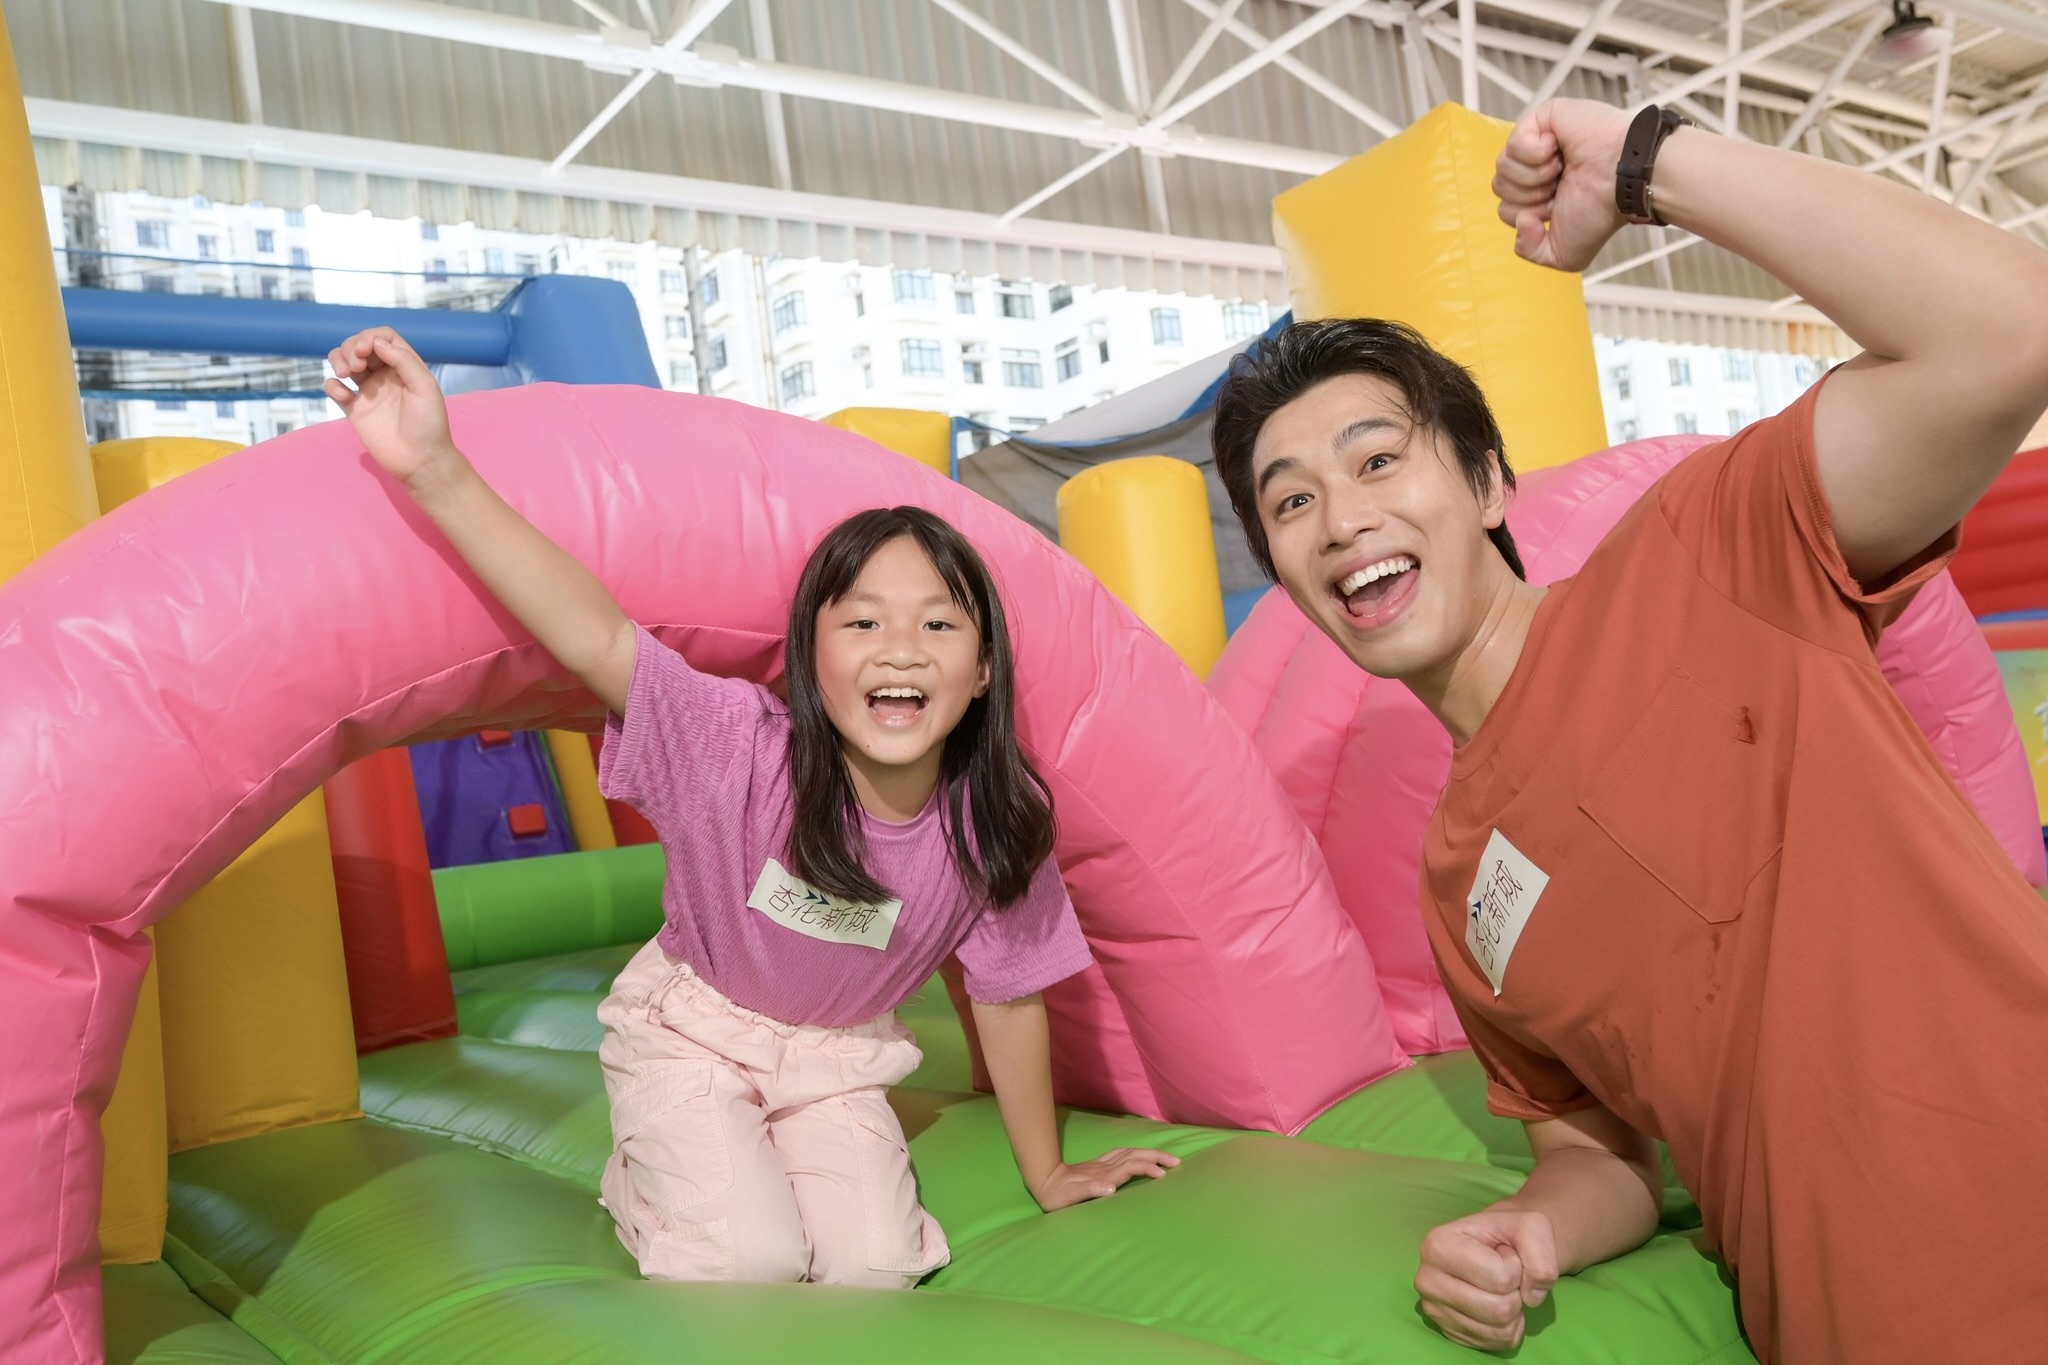 A girl and man pose in front of a colourful inflatable obstacle course. They are cheering with their hands.